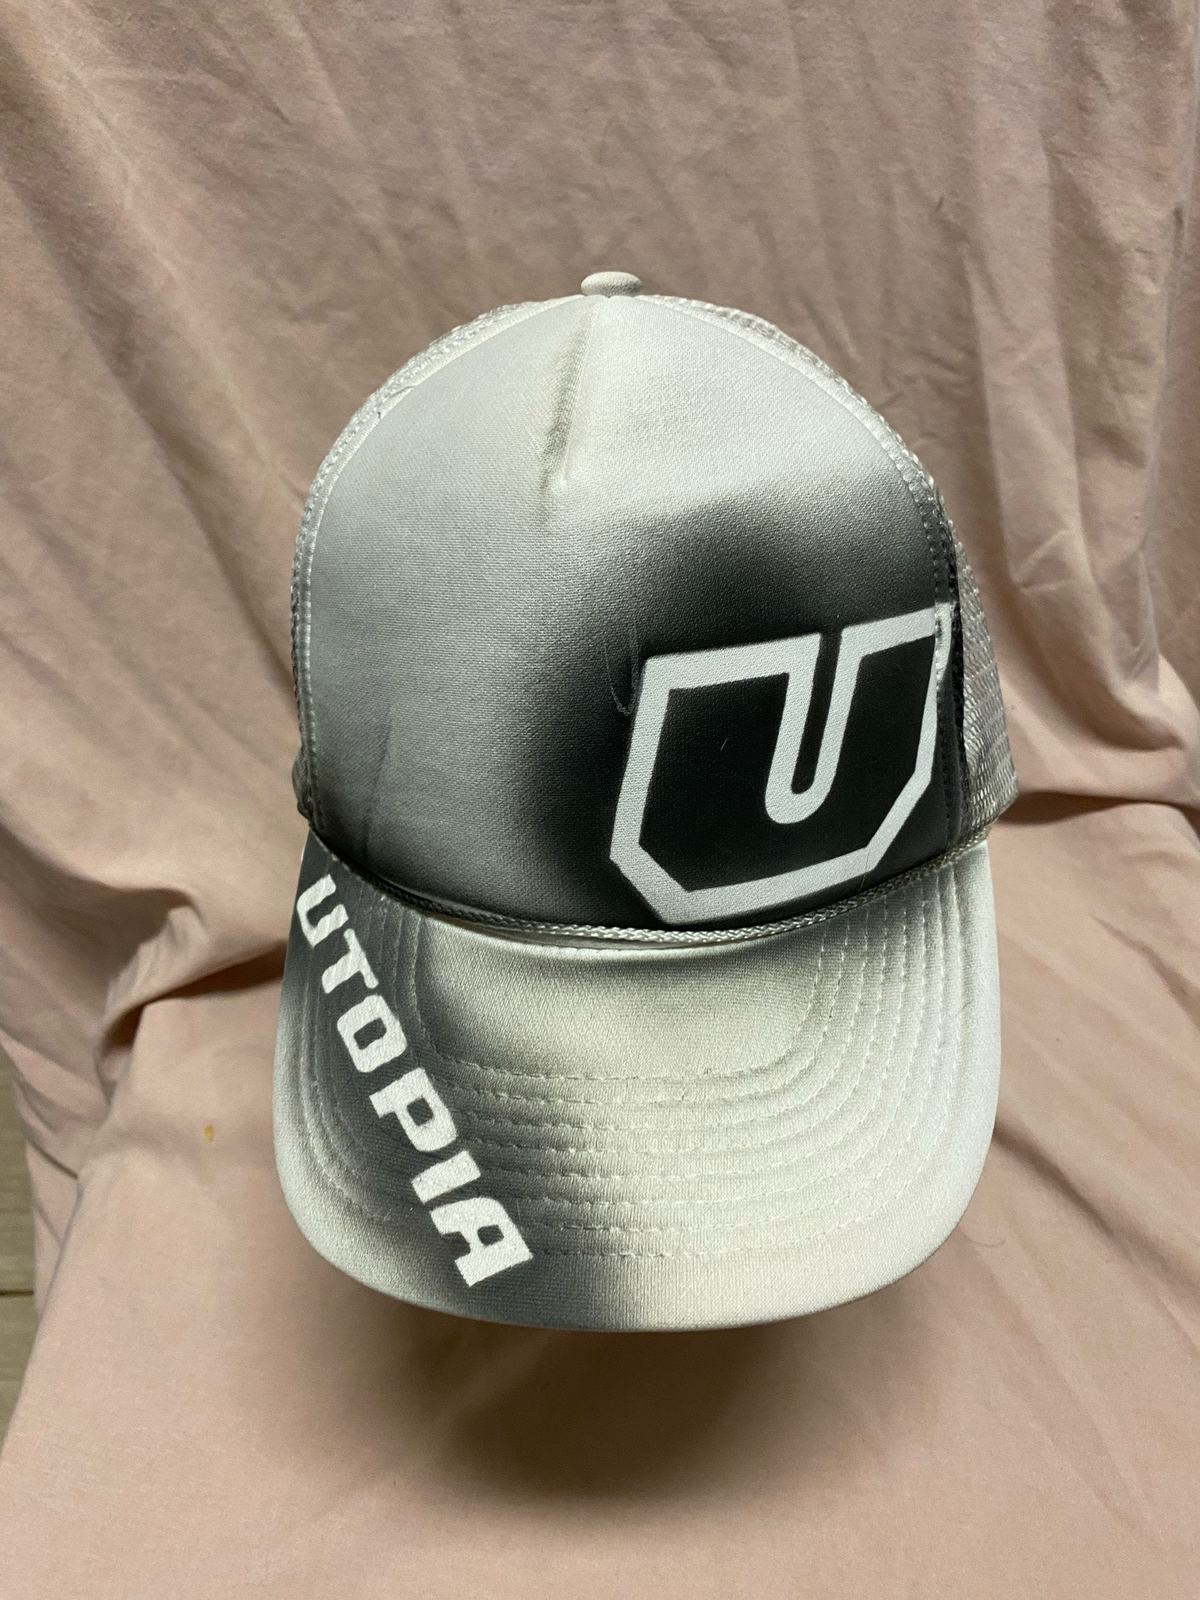 Primary image for Utopia Trucker Style SnapBack Hat